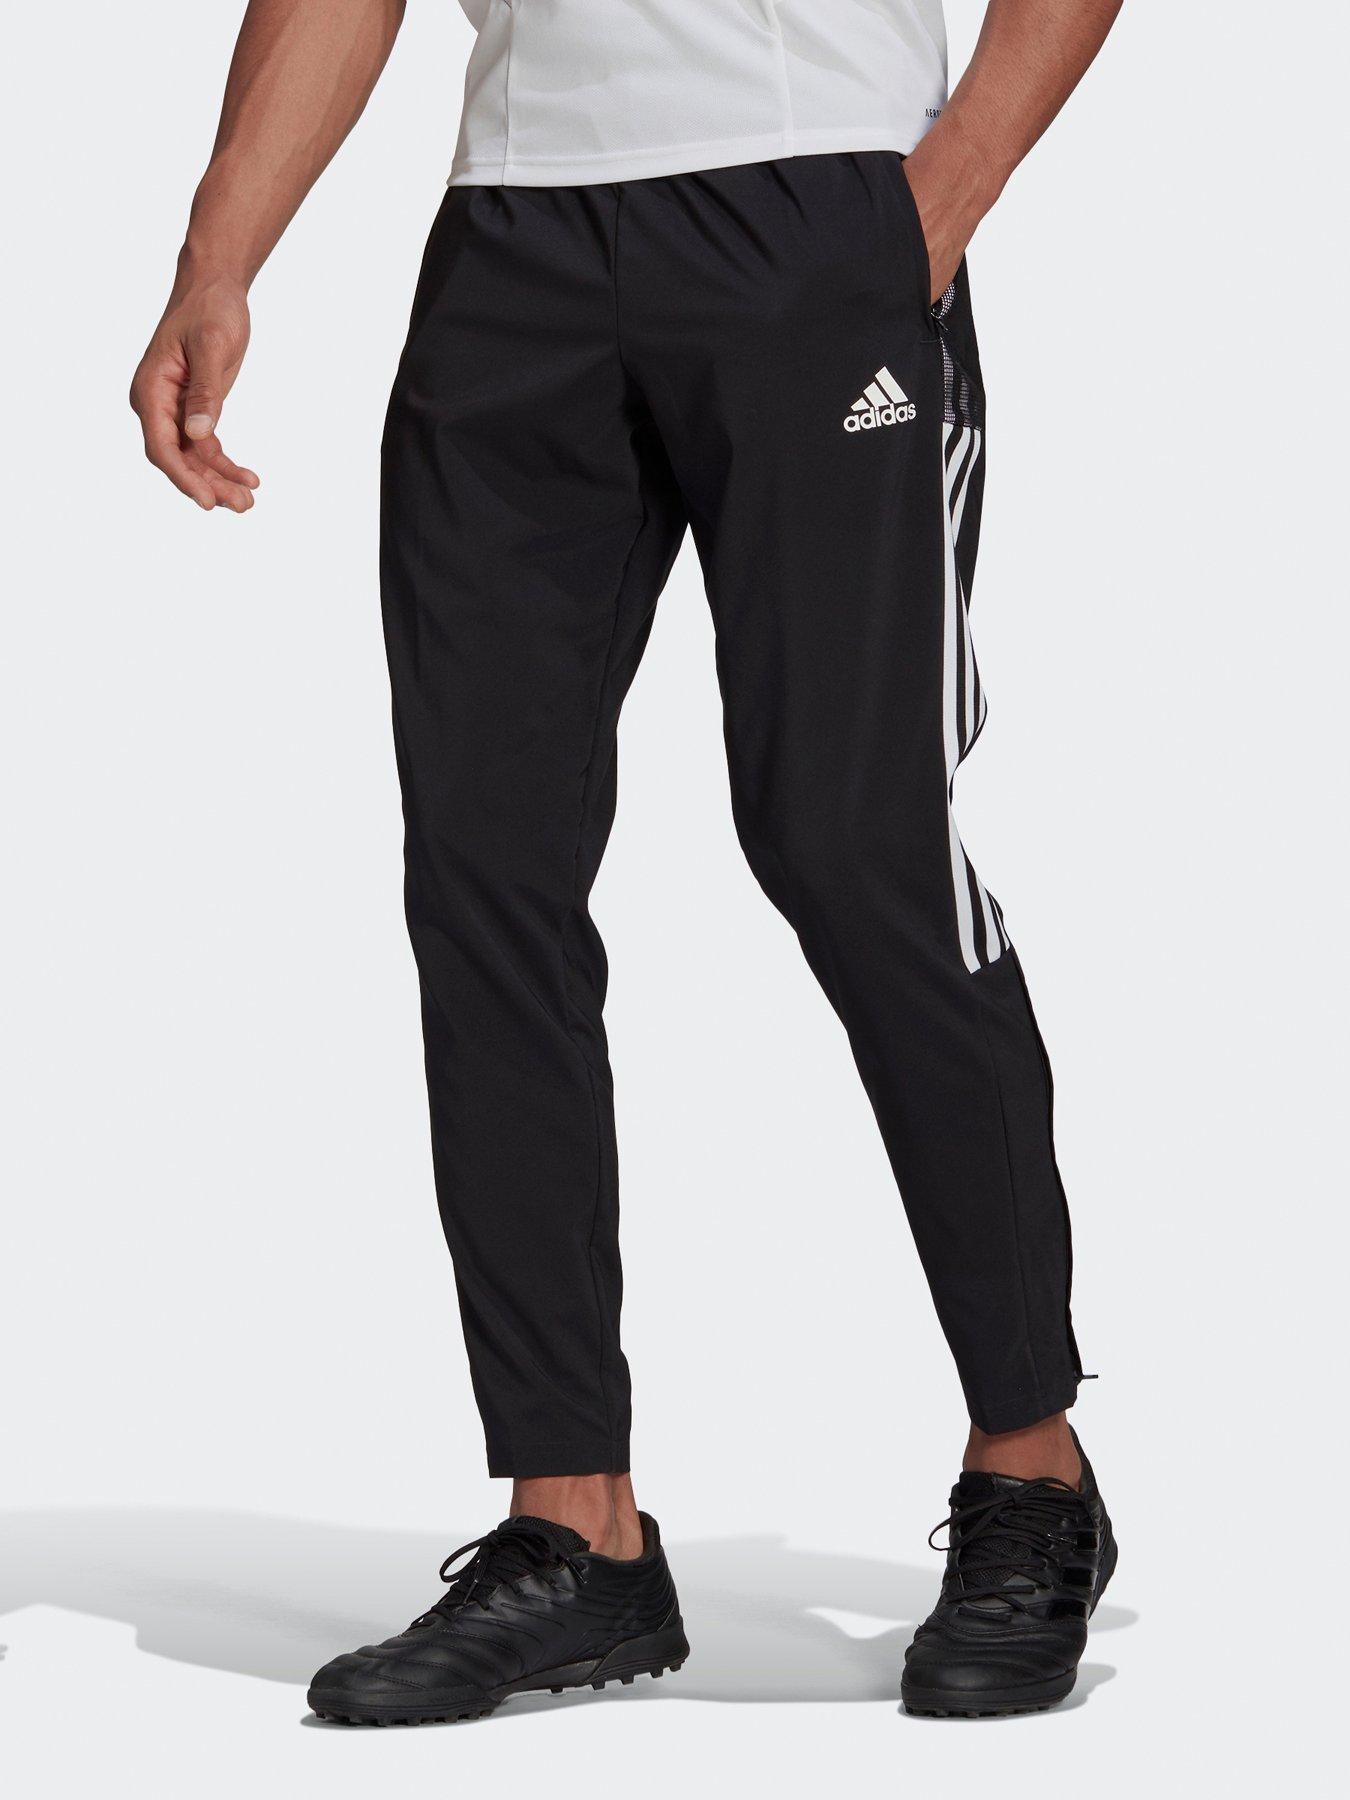 MEN FASHION Trousers Sports Black S Adidas tracksuit and joggers discount 64% 